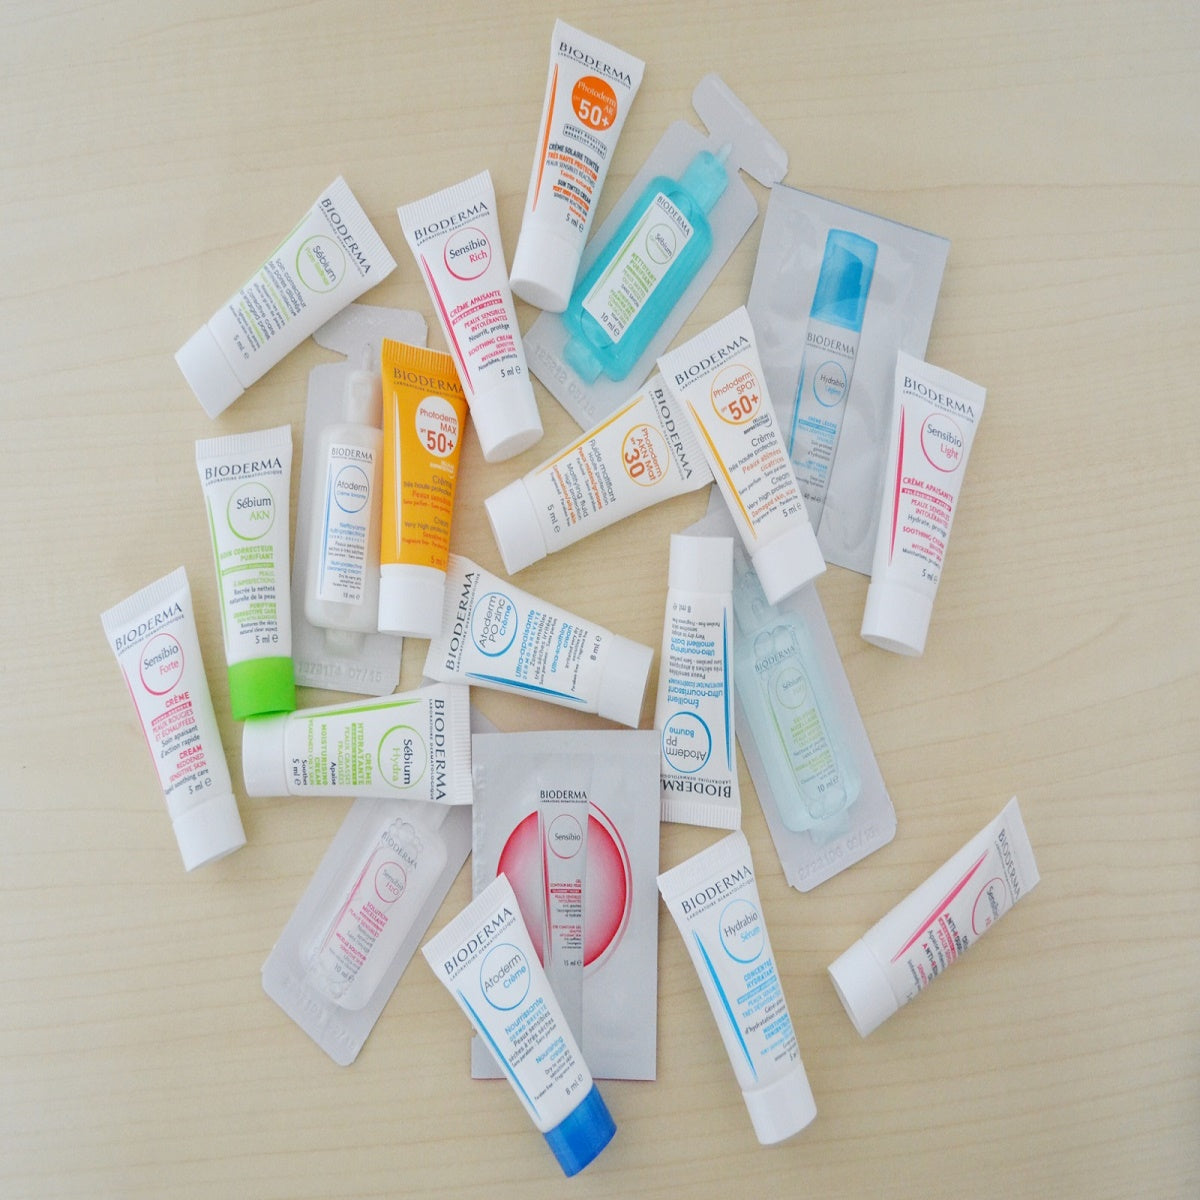 Assorted Bioderma Skincare Samplers Collection, featuring sunscreens and micellar water, perfect for comprehensive skin protection.